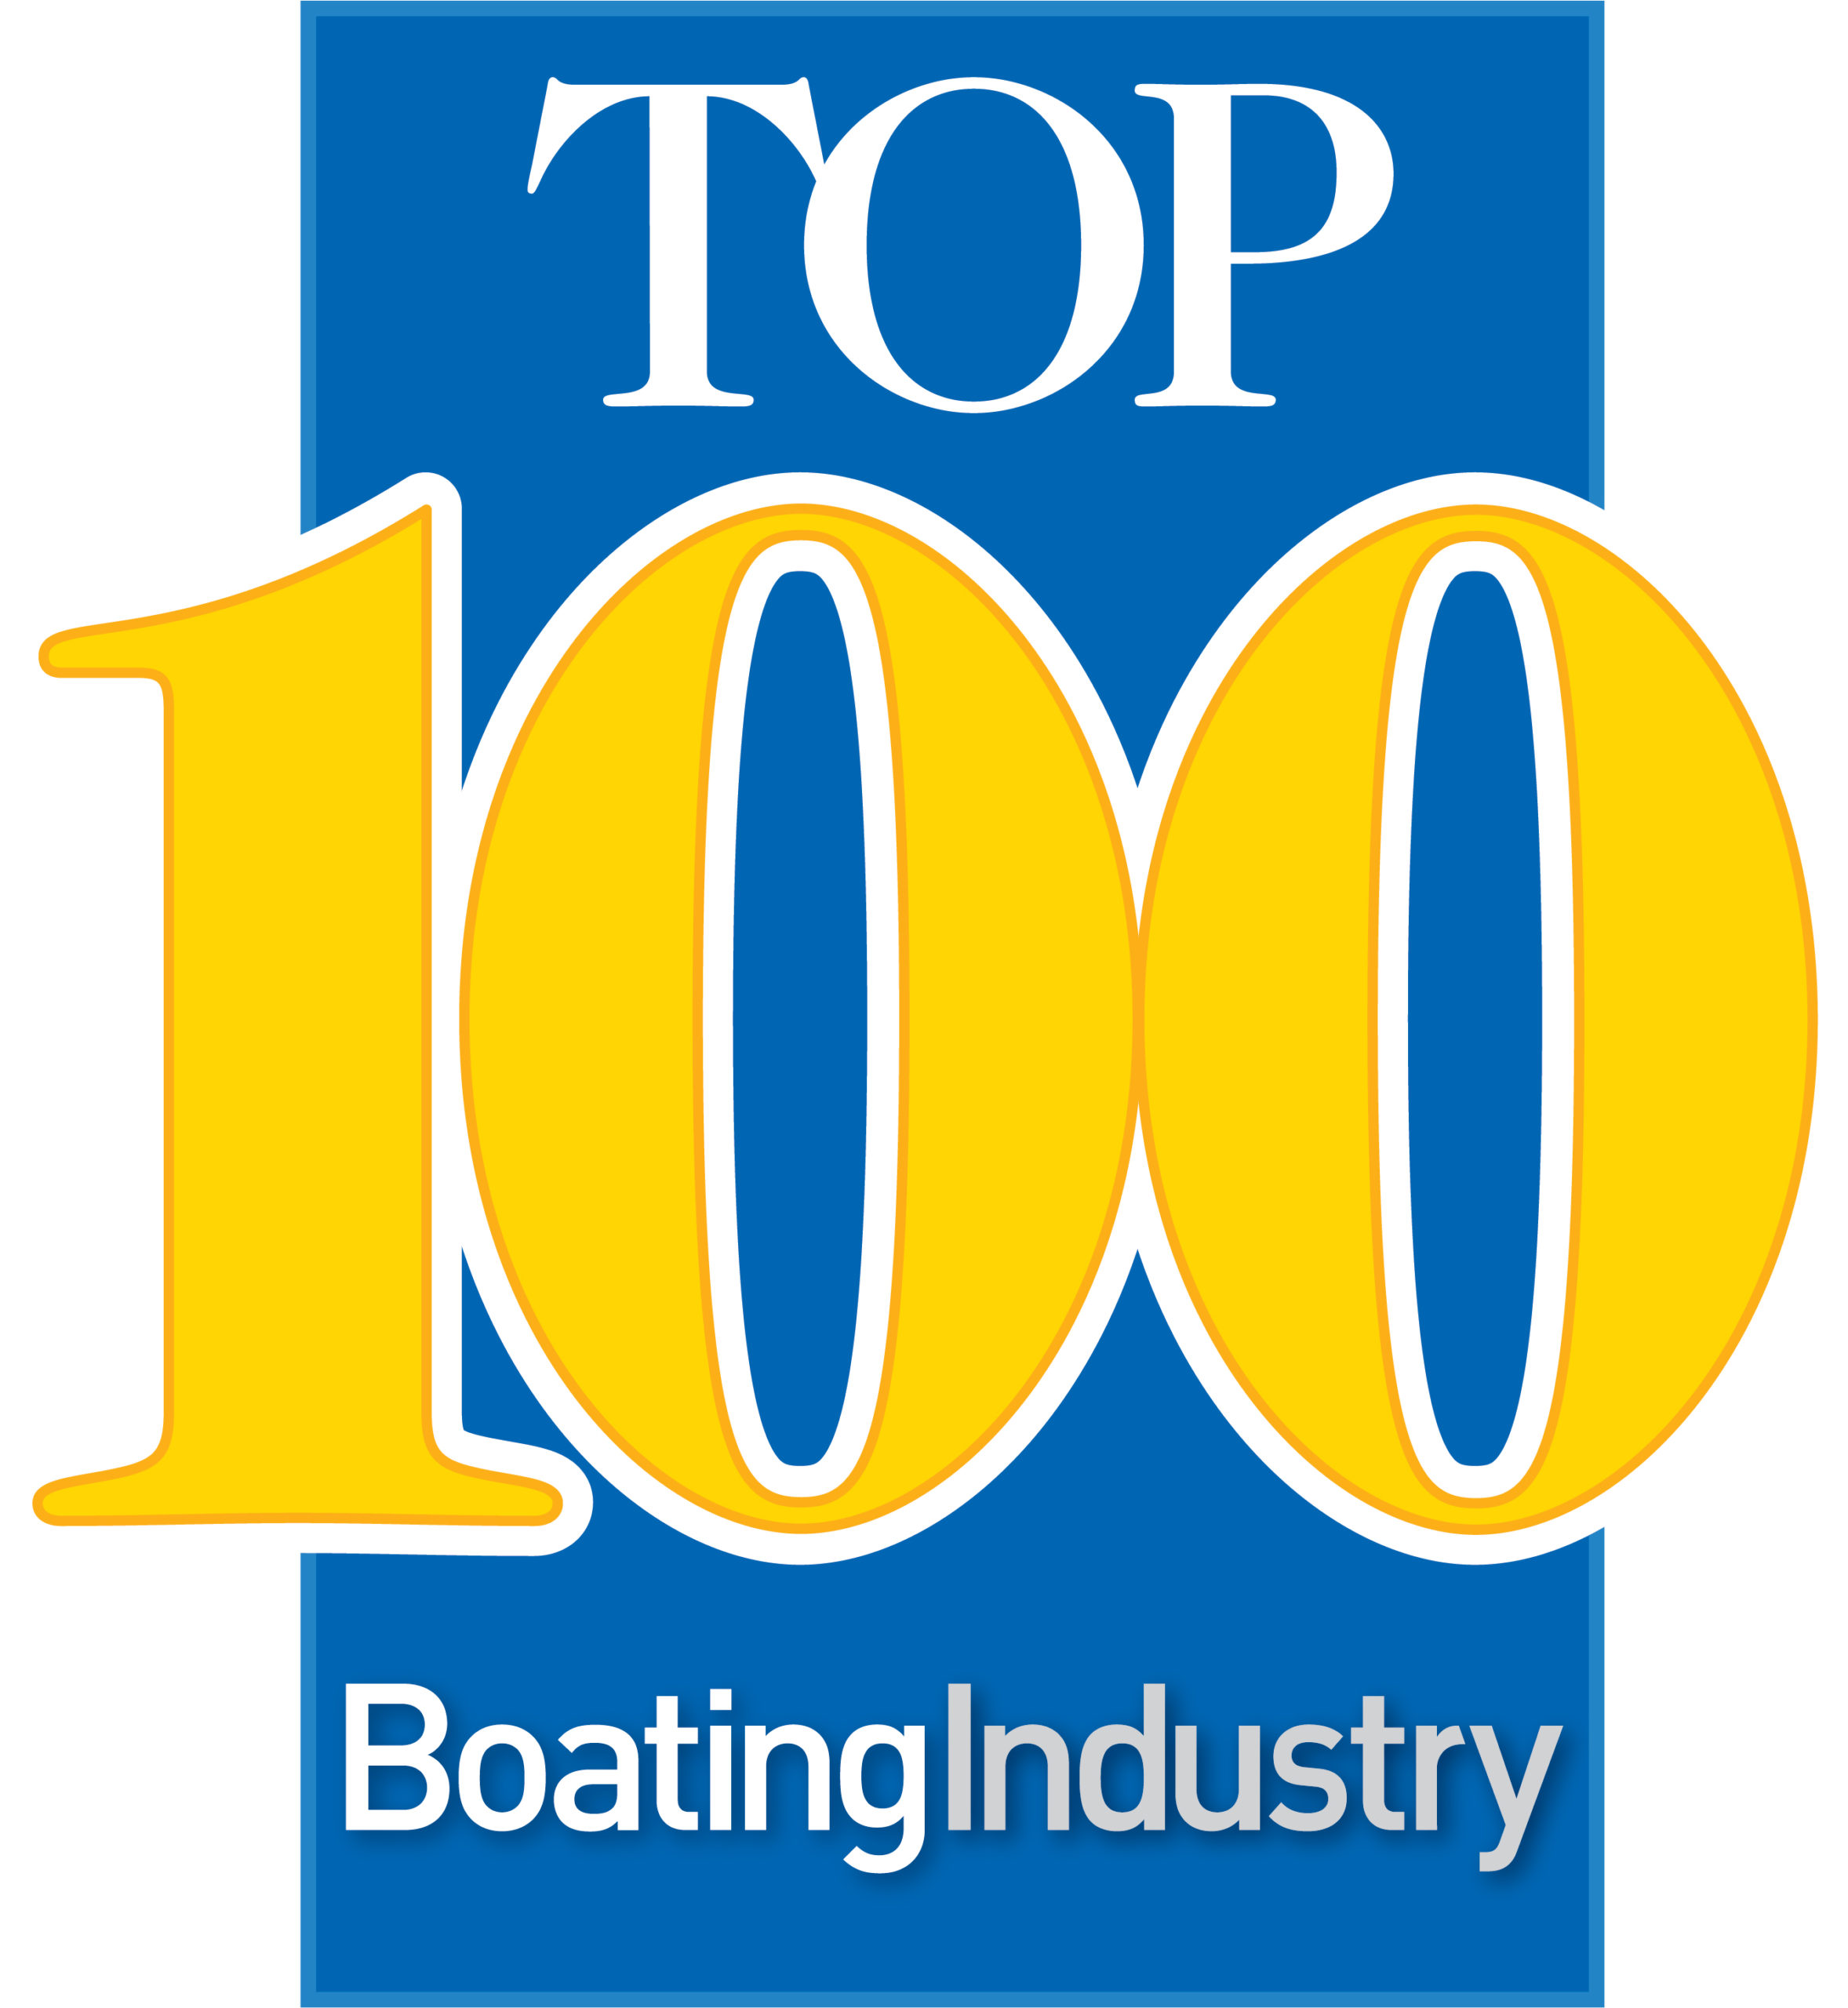 Boating Industry issues last call for 2022 Top 100 applications